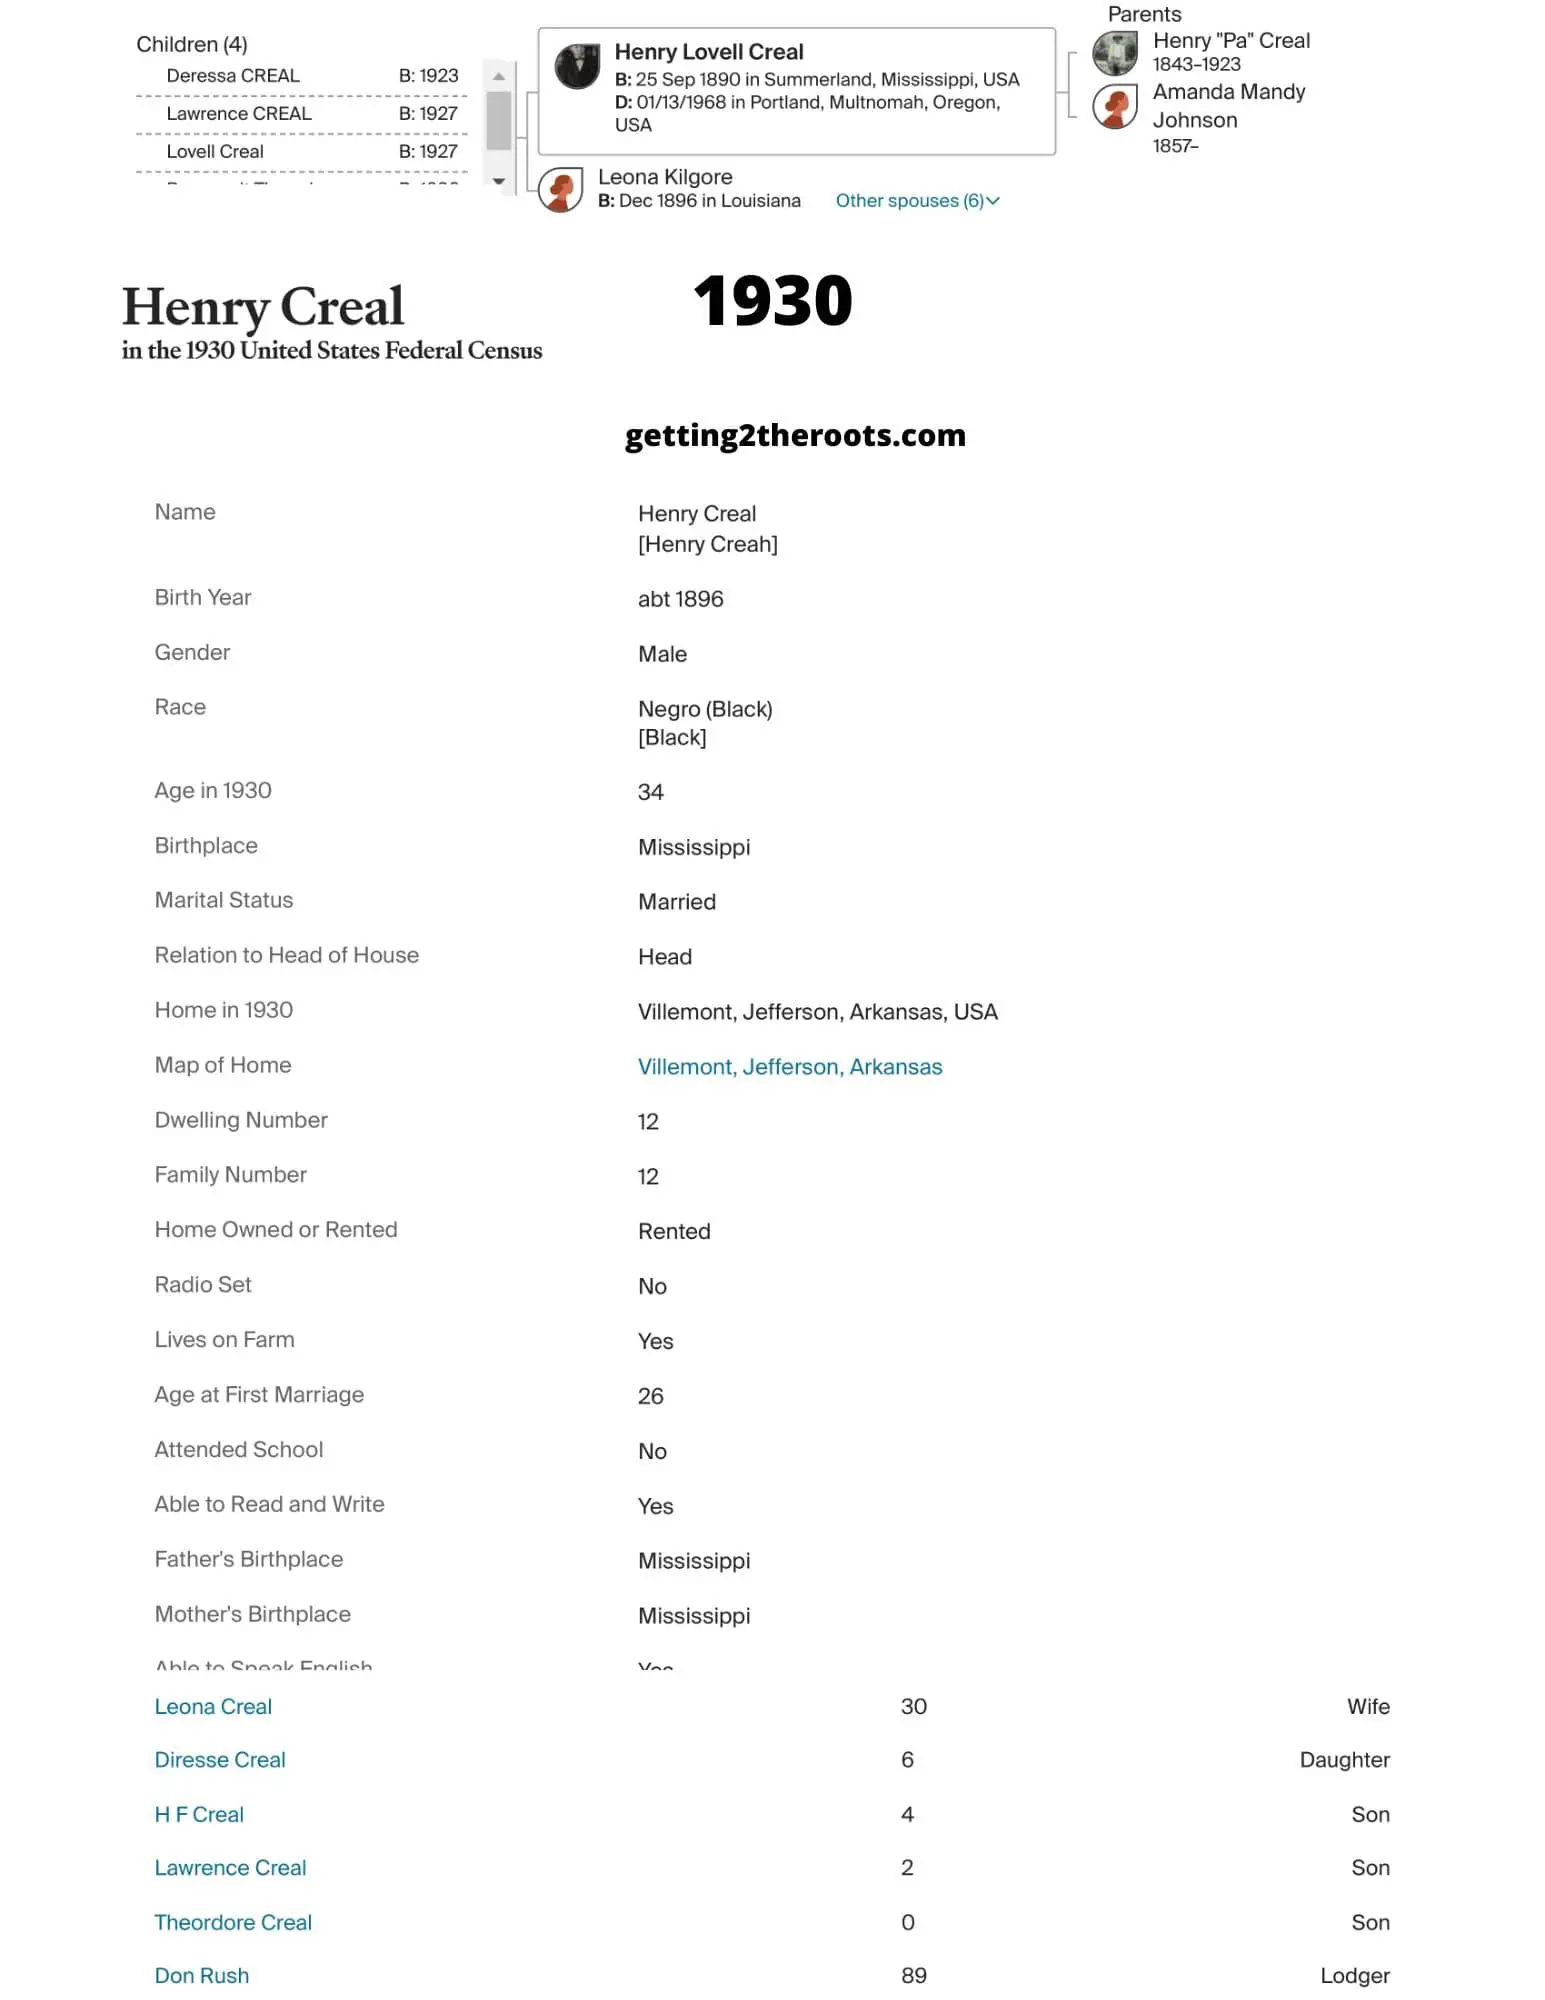 The 1930 Census for my grandfather, Henry, was used in my article, "The Life Story Of My Grandfather Henry Lovell Creal, Jr."